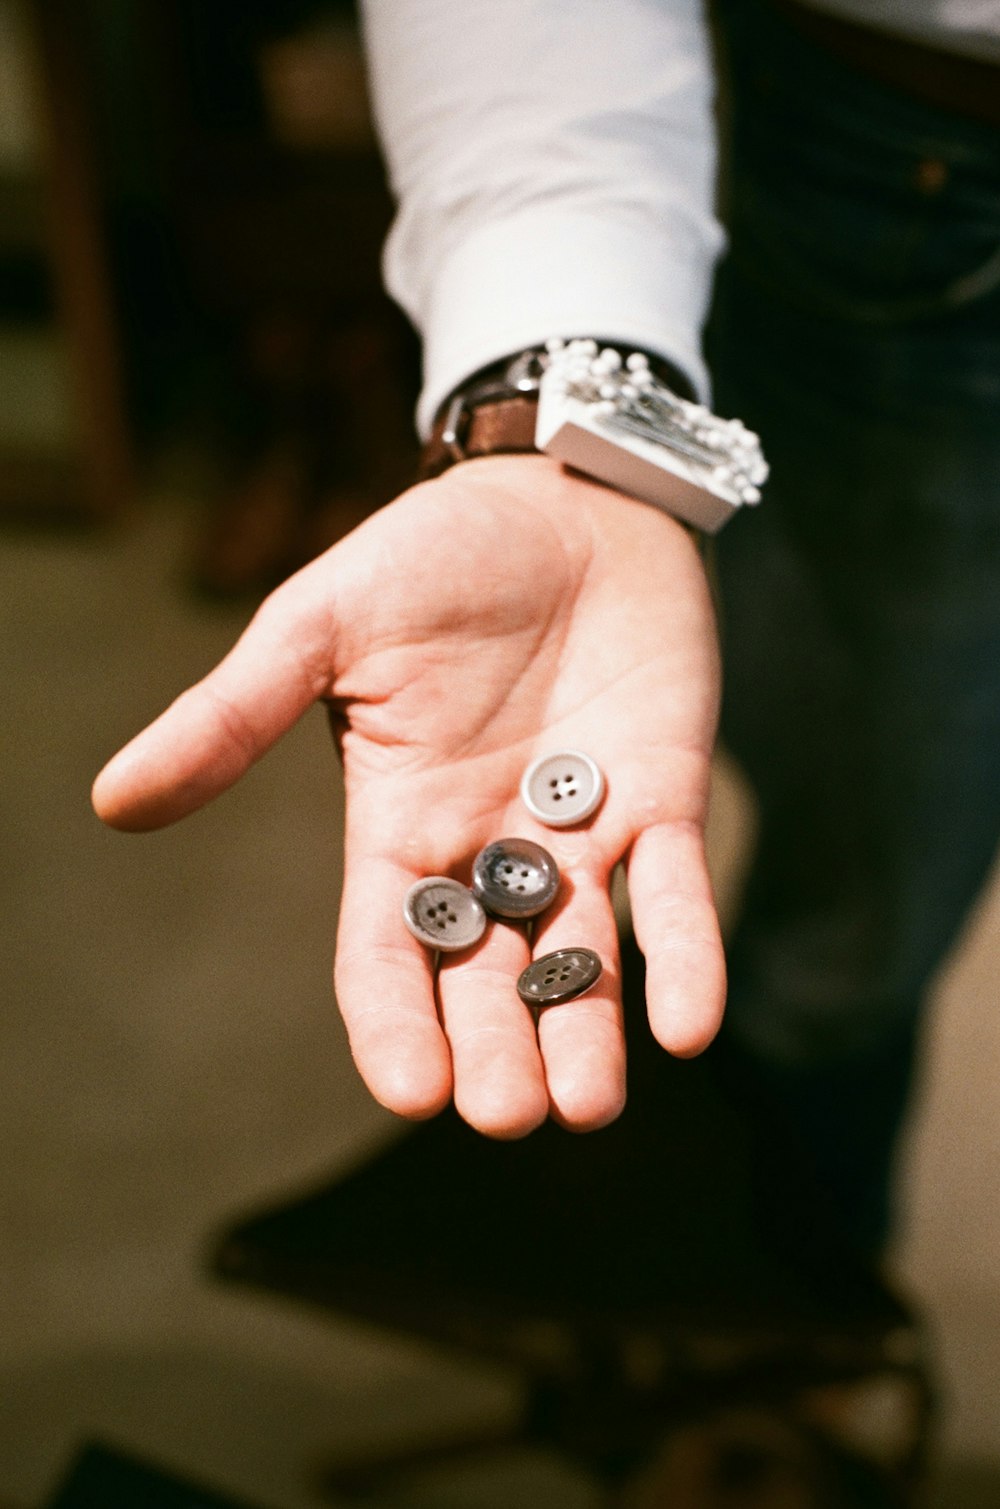 a person with two buttons in their hand